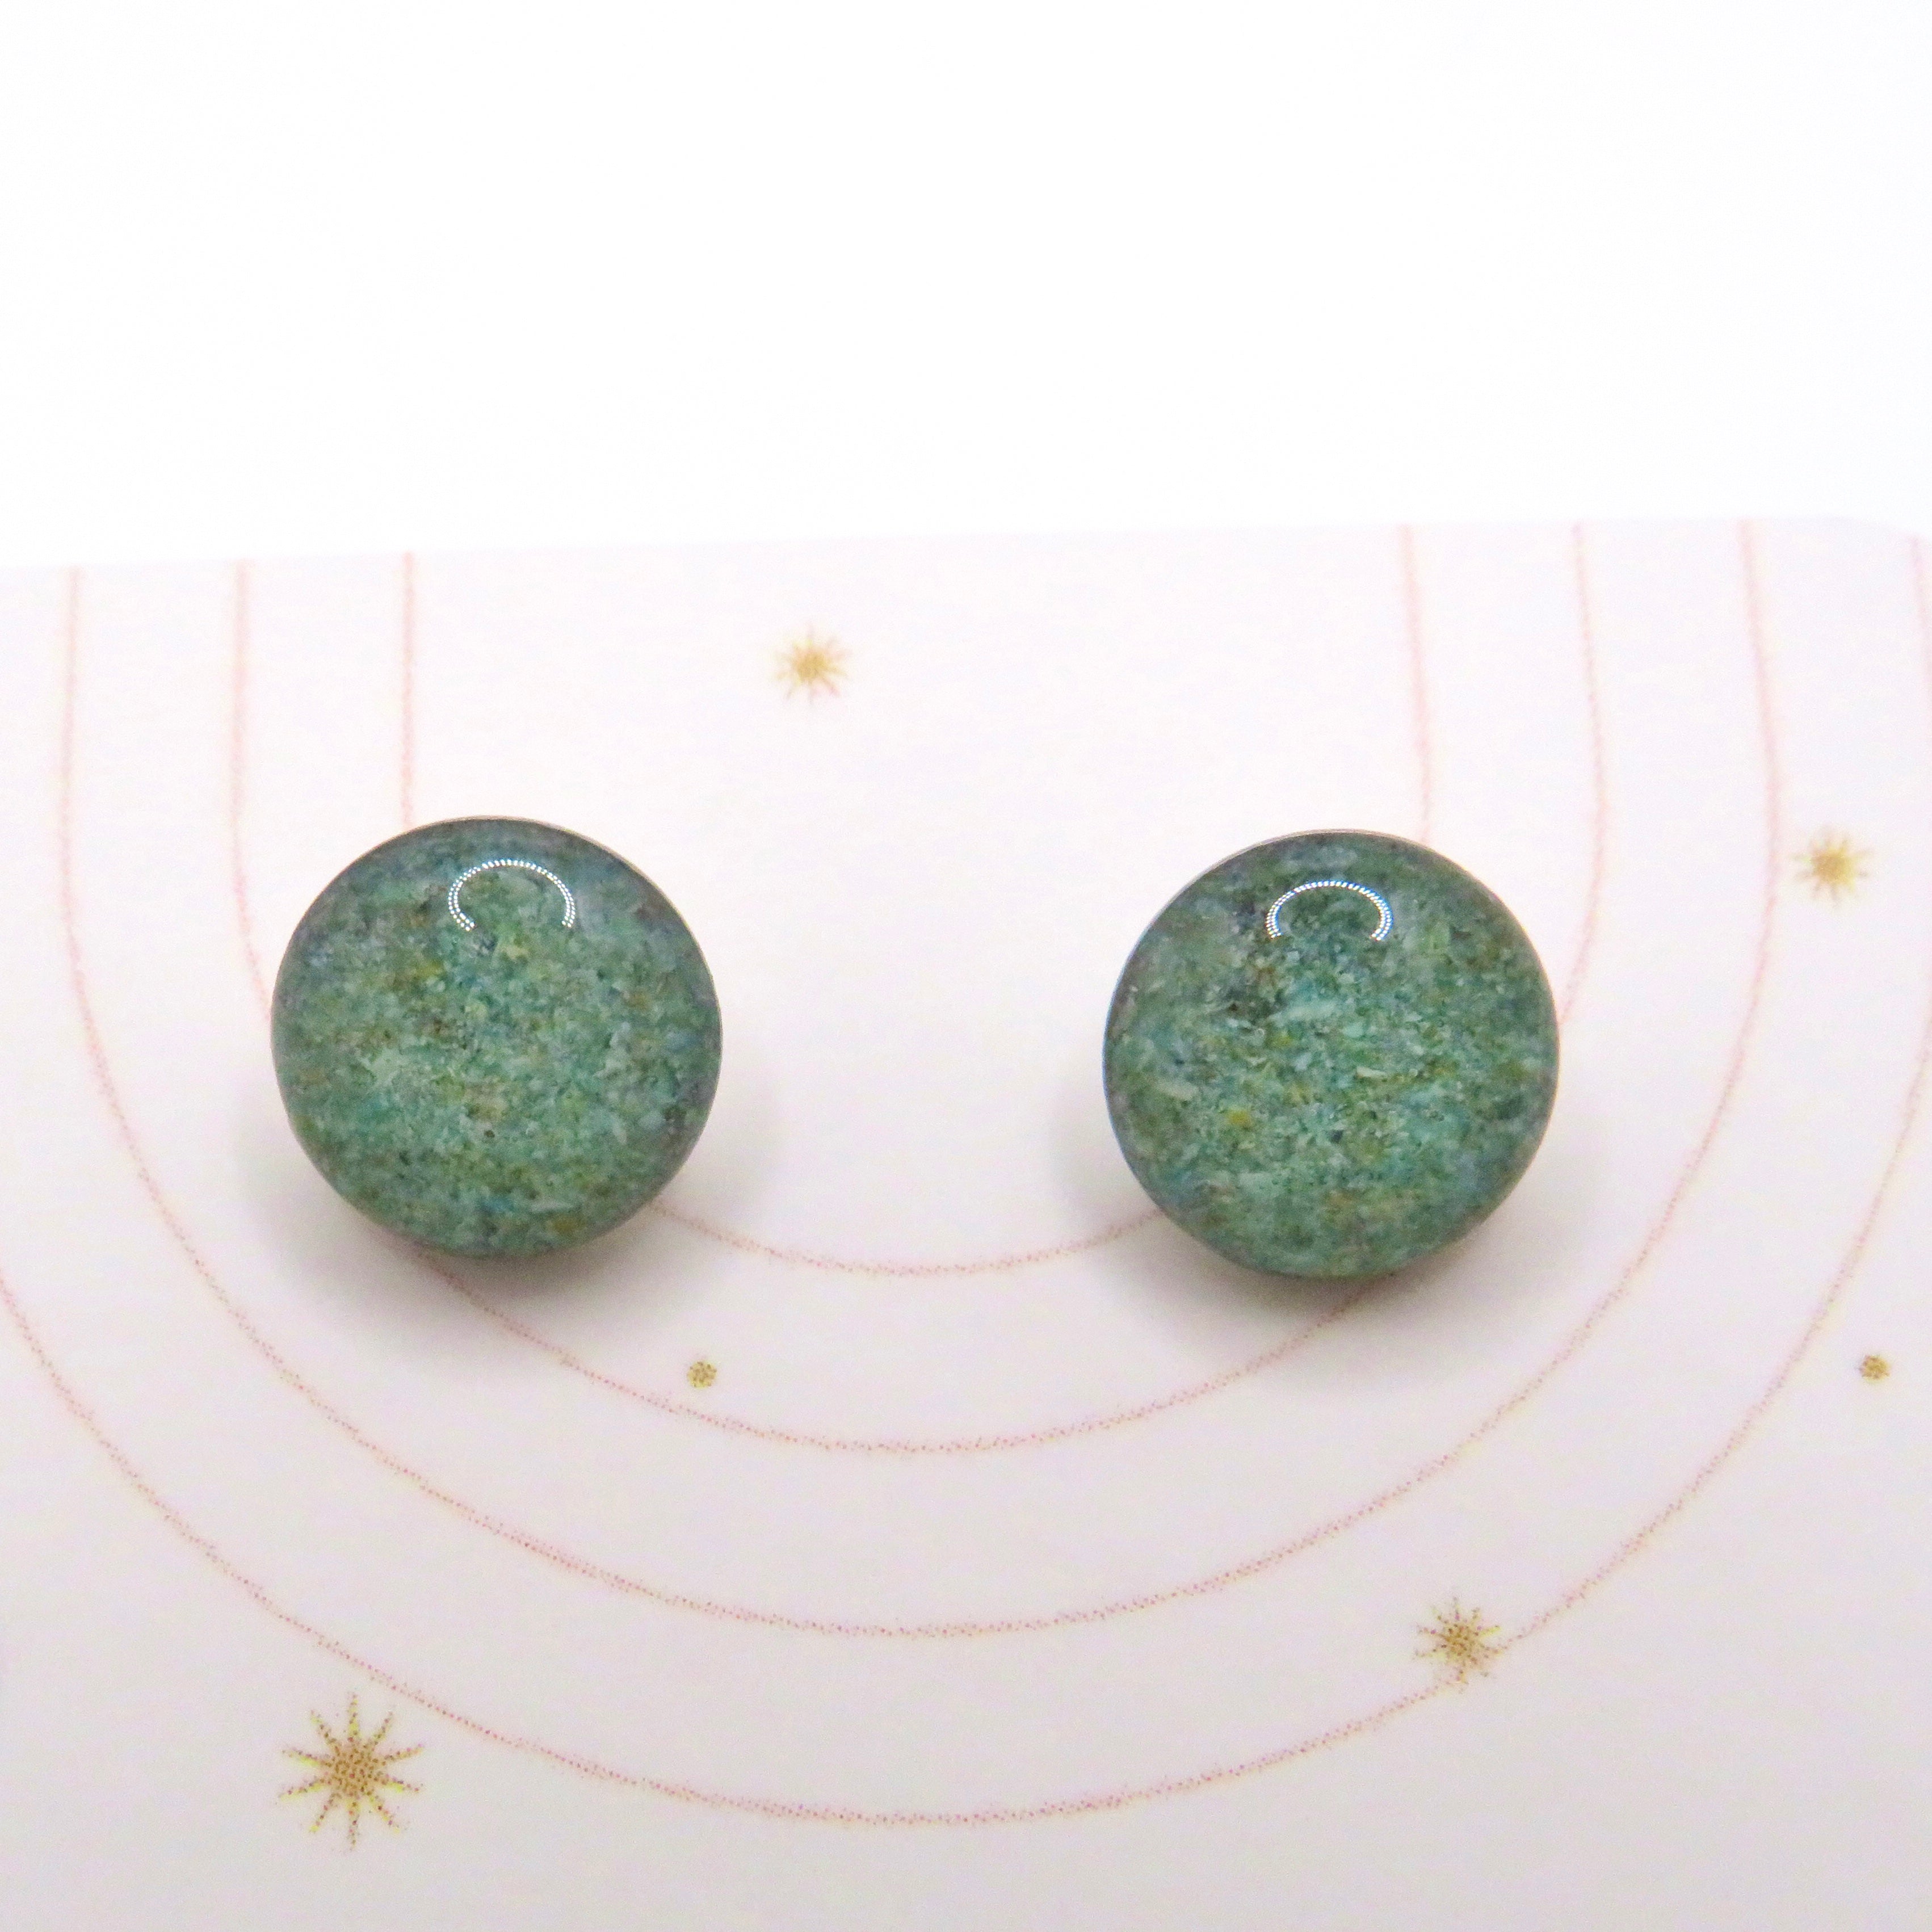 8mm Round Crushed Gemstone Stud Earrings | Assorted Stones